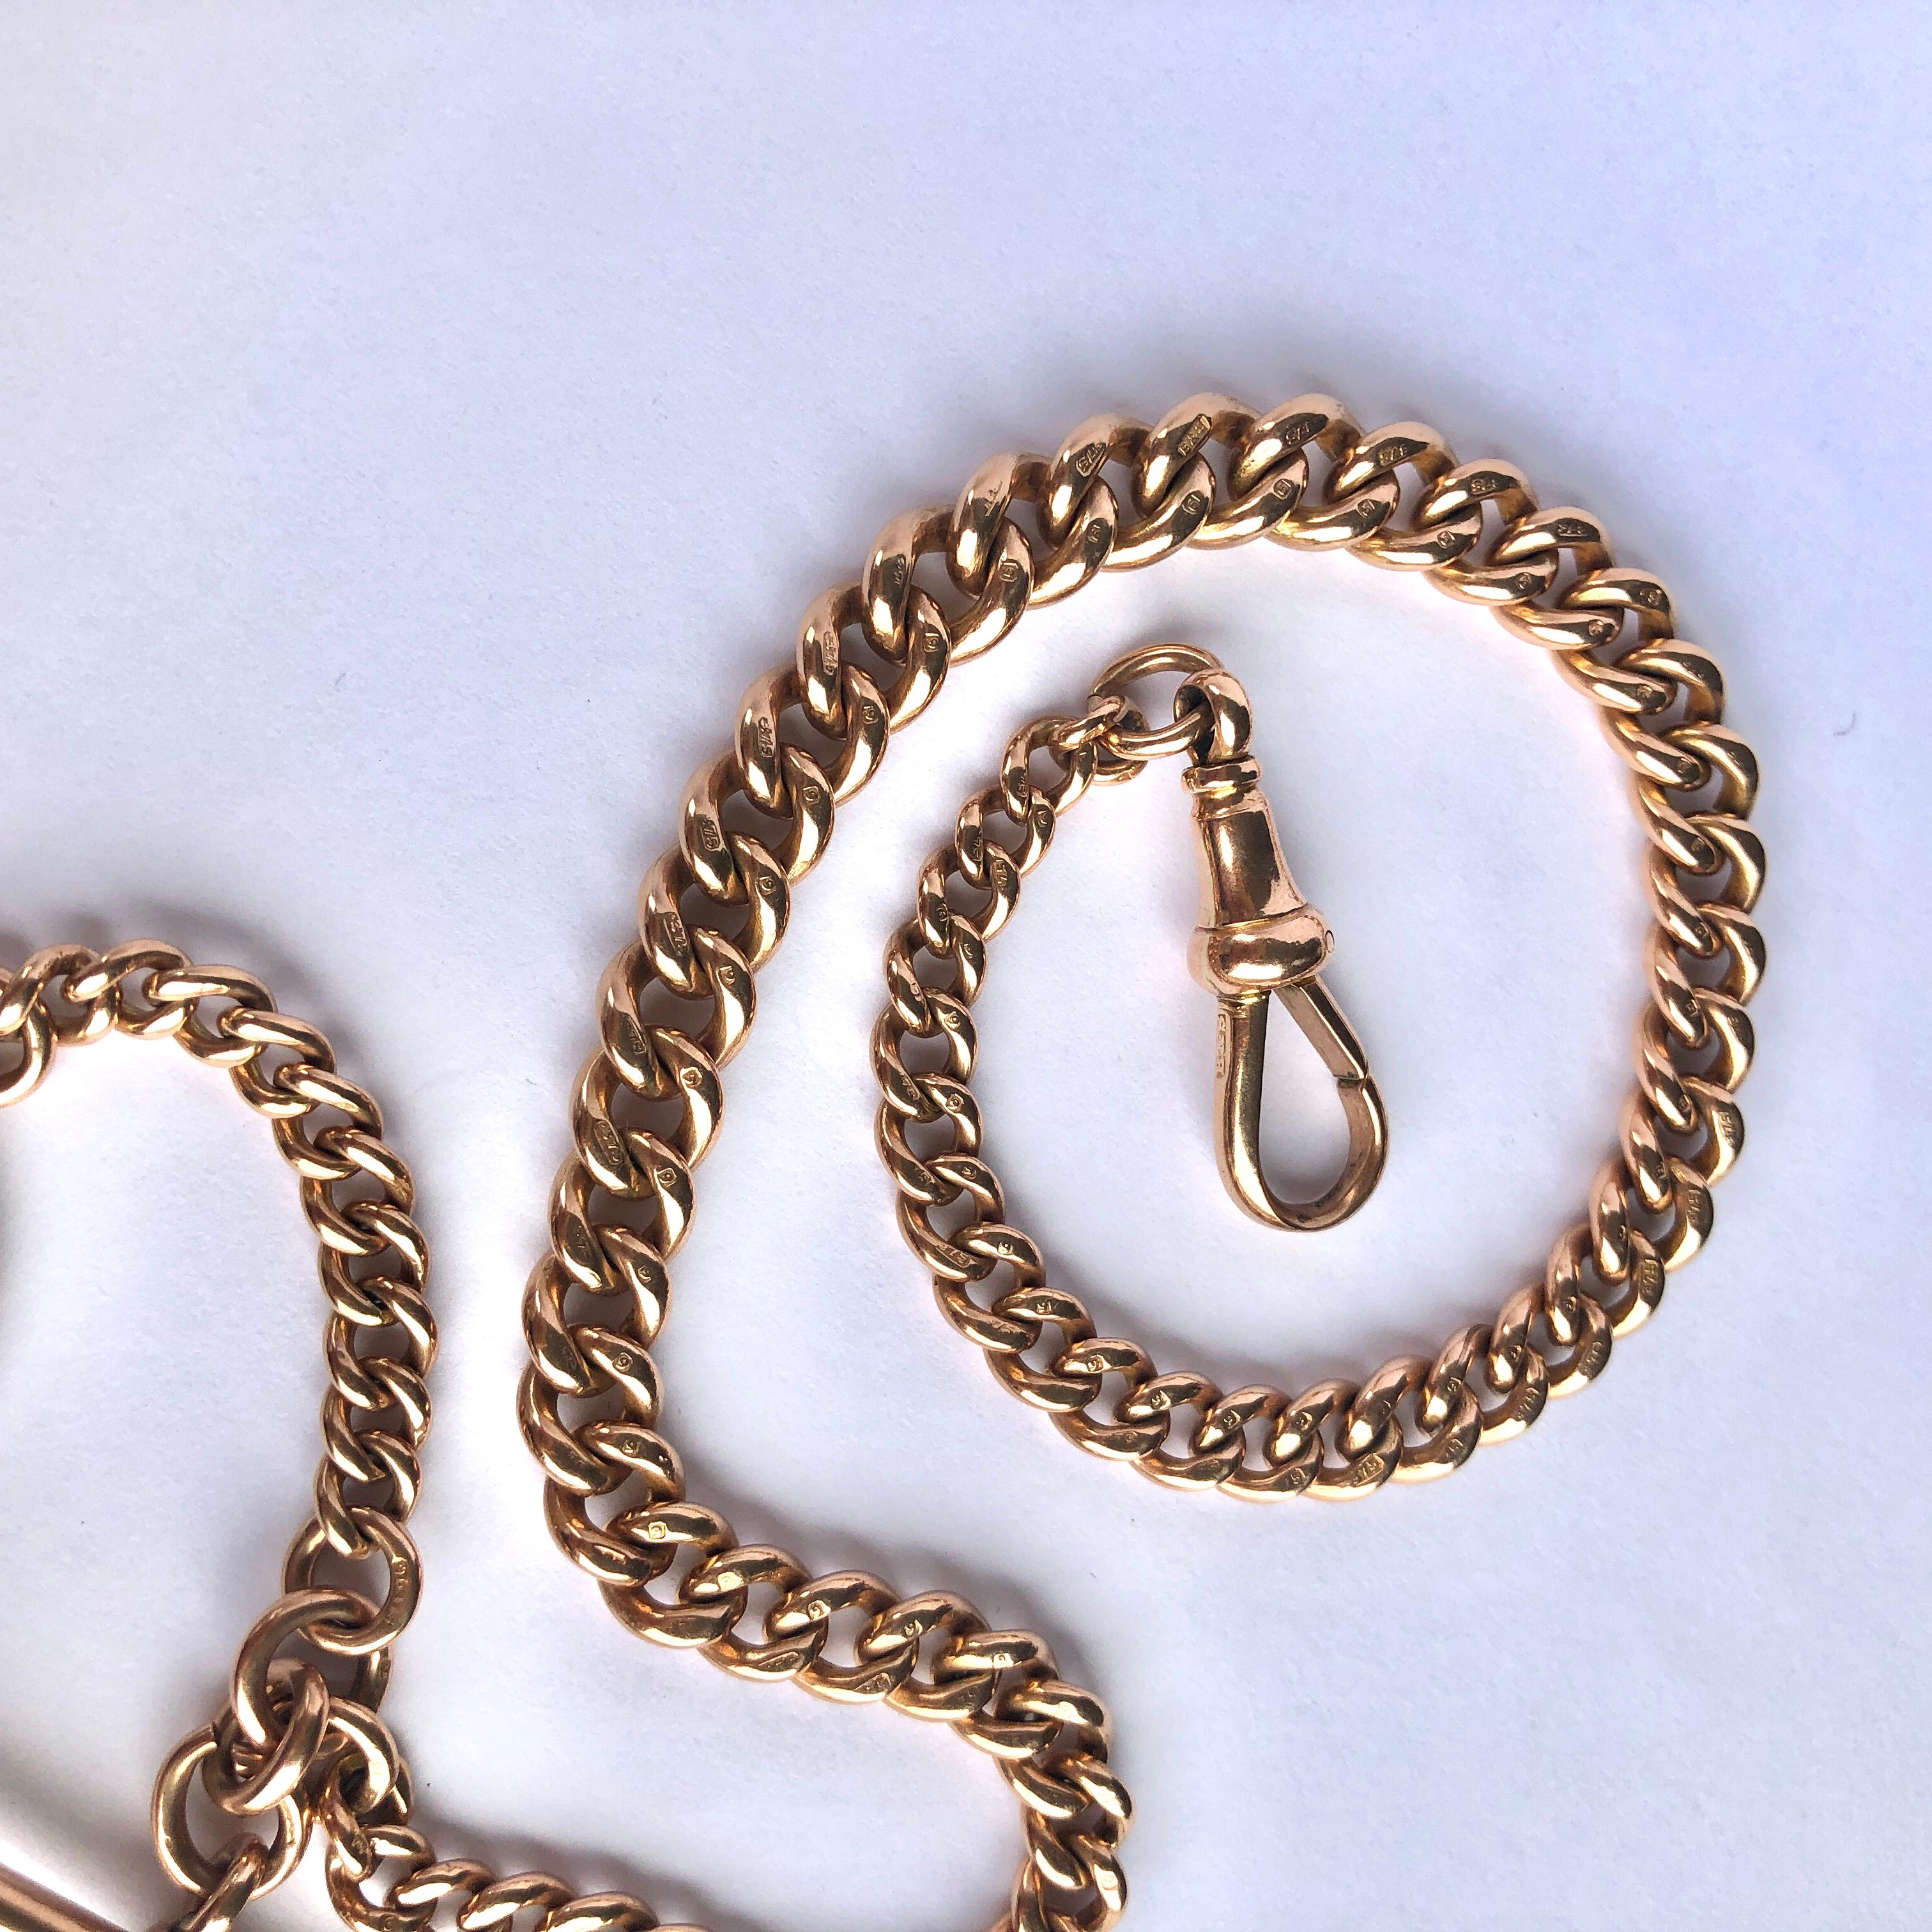 This rose gold albert chain is the perfect addition to any gents wardrobe or can be worn as a necklace and has a dog clip on one side and a t-bar on the other. Each link is hallmarked and it slightly graduates in size starting with the larger links